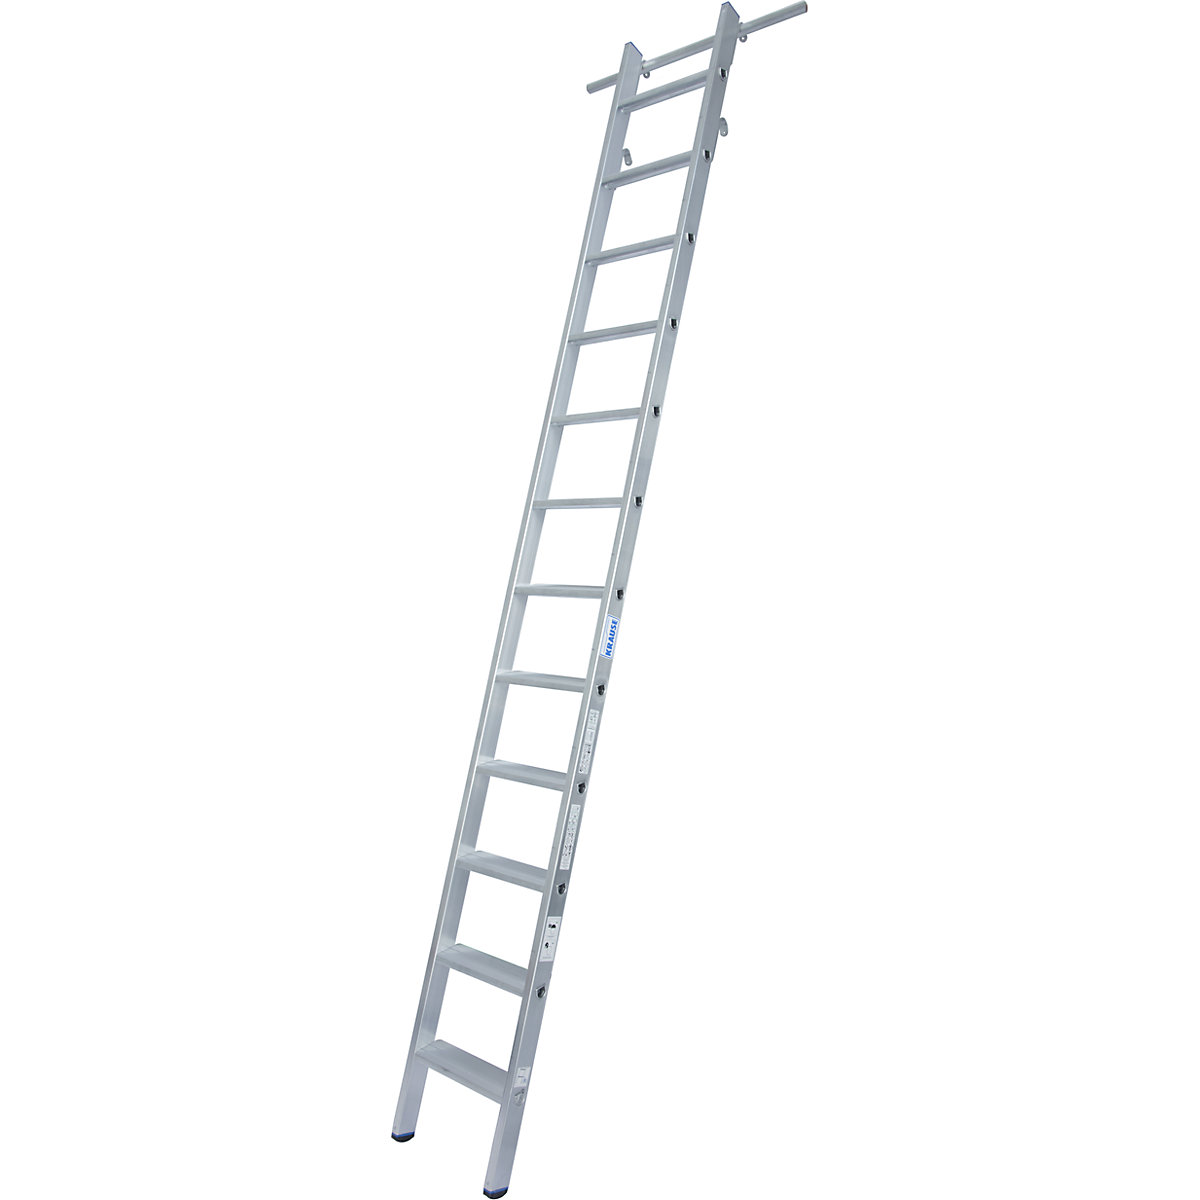 KRAUSE – Step shelf ladder, can be suspended, 2 pairs of suspension hooks, 12 steps